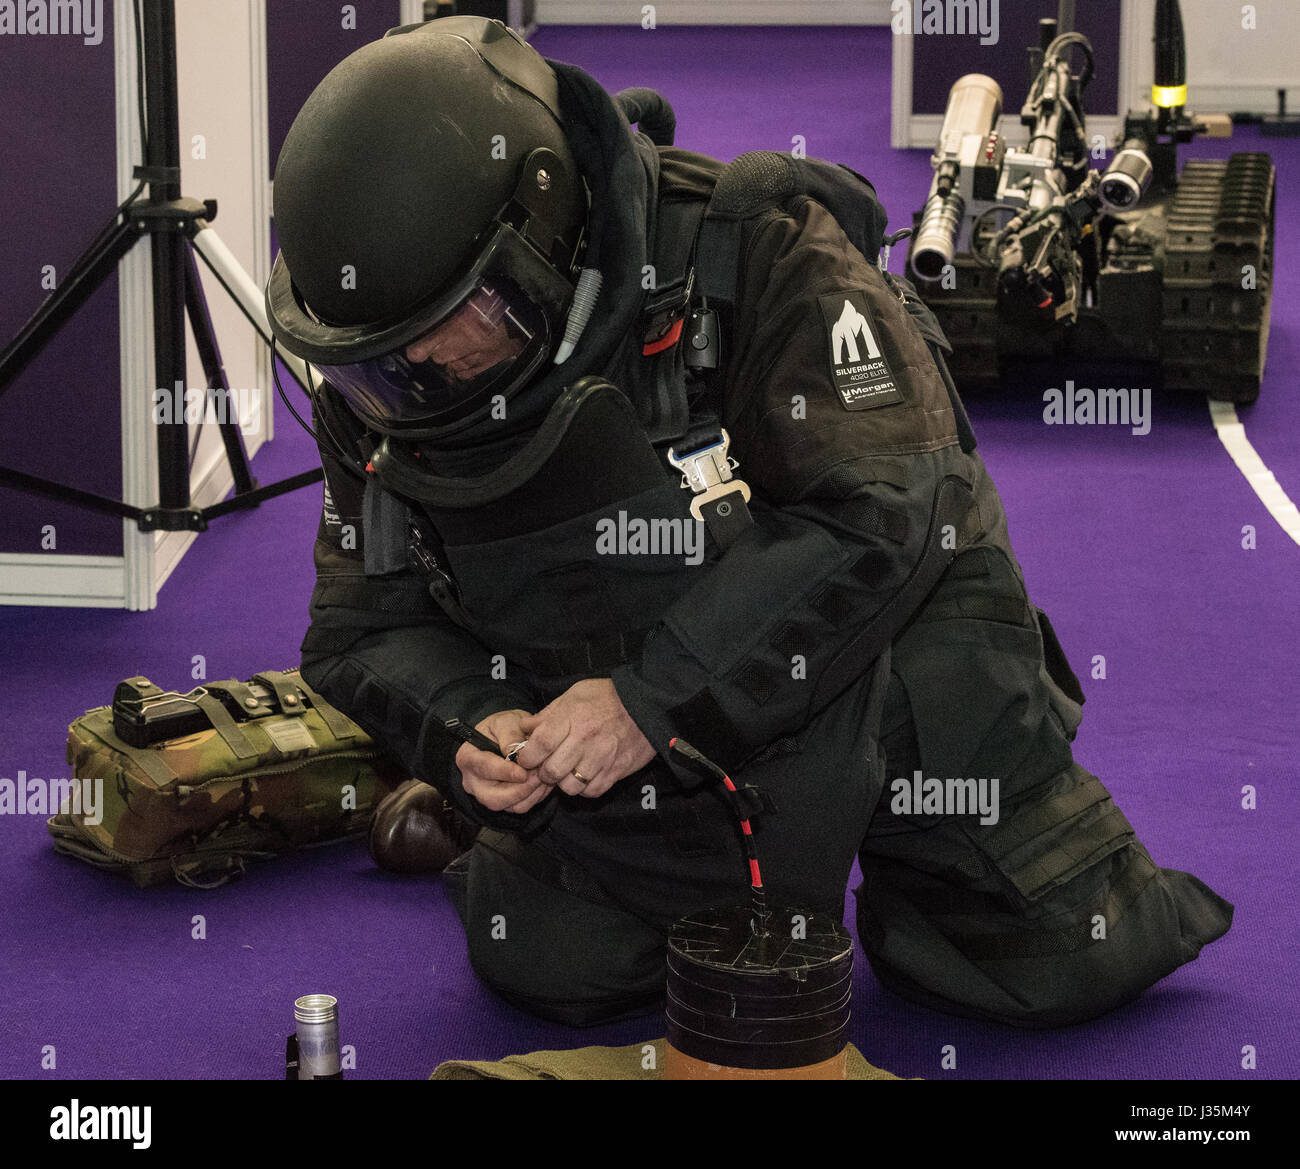 London 3rd May 2017 British army demonstration of IED disarming at the Counter Terror Expo, London Credit: Ian Davidson/Alamy Live News Stock Photo